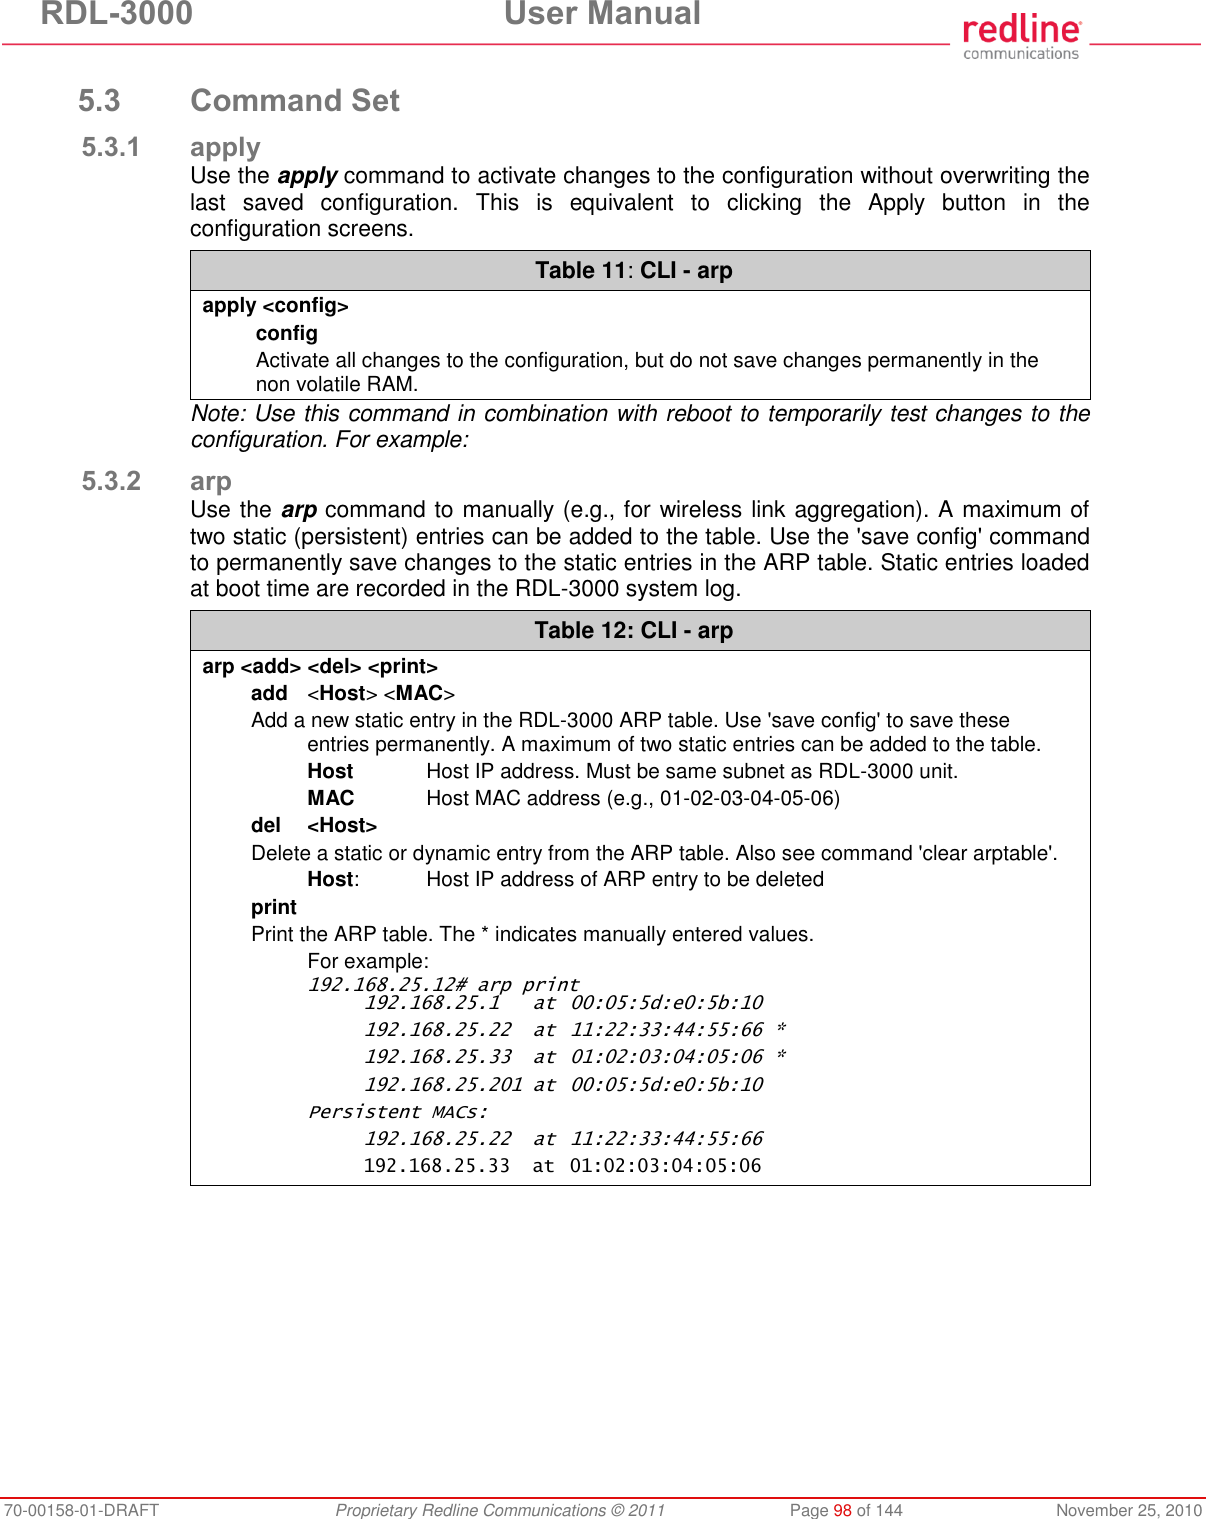 RDL-3000  User Manual 70-00158-01-DRAFT  Proprietary Redline Communications © 2011  Page 98 of 144  November 25, 2010  5.3 Command Set 5.3.1 apply Use the apply command to activate changes to the configuration without overwriting the last  saved  configuration.  This  is  equivalent  to  clicking  the  Apply  button  in  the configuration screens.  Table 11: CLI - arp apply &lt;config&gt; config Activate all changes to the configuration, but do not save changes permanently in the non volatile RAM. Note: Use this command in combination with reboot to temporarily test changes to the configuration. For example: 5.3.2 arp Use the arp command to manually (e.g., for wireless link aggregation). A maximum of two static (persistent) entries can be added to the table. Use the &apos;save config&apos; command to permanently save changes to the static entries in the ARP table. Static entries loaded at boot time are recorded in the RDL-3000 system log. Table 12: CLI - arp arp &lt;add&gt; &lt;del&gt; &lt;print&gt; add  &lt;Host&gt; &lt;MAC&gt; Add a new static entry in the RDL-3000 ARP table. Use &apos;save config&apos; to save these entries permanently. A maximum of two static entries can be added to the table.  Host  Host IP address. Must be same subnet as RDL-3000 unit.  MAC  Host MAC address (e.g., 01-02-03-04-05-06) del  &lt;Host&gt; Delete a static or dynamic entry from the ARP table. Also see command &apos;clear arptable&apos;.  Host:  Host IP address of ARP entry to be deleted print Print the ARP table. The * indicates manually entered values.   For example: 192.168.25.12# arp print   192.168.25.1  at  00:05:5d:e0:5b:10   192.168.25.22  at  11:22:33:44:55:66 *   192.168.25.33  at  01:02:03:04:05:06 *   192.168.25.201 at  00:05:5d:e0:5b:10 Persistent MACs:   192.168.25.22  at  11:22:33:44:55:66   192.168.25.33  at  01:02:03:04:05:06  